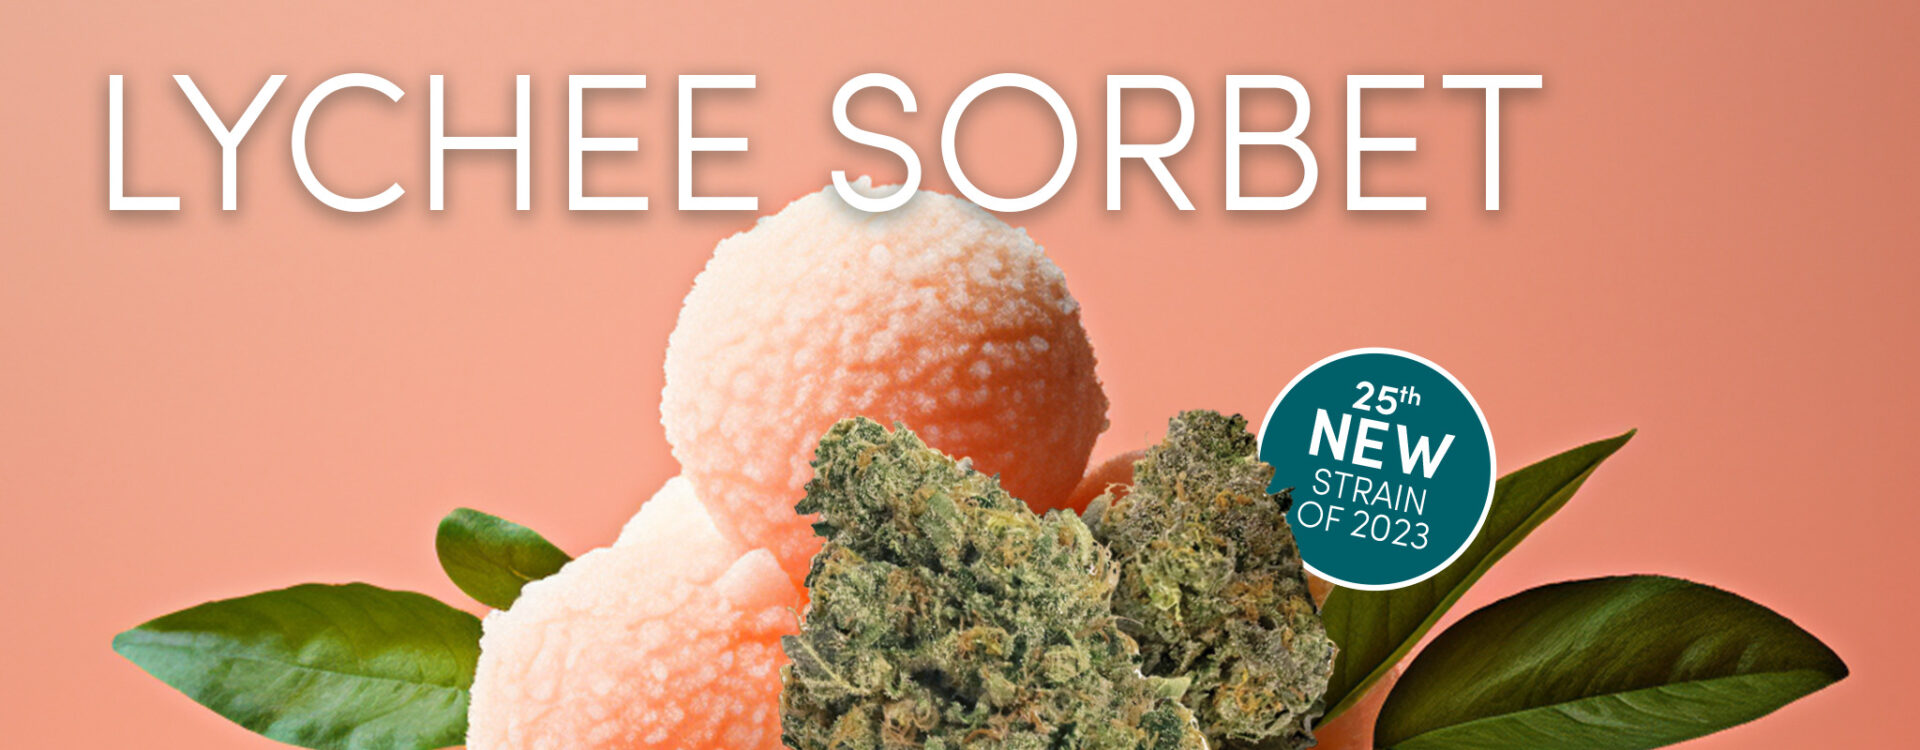 Lychee sorbet is a new cannabis strain.